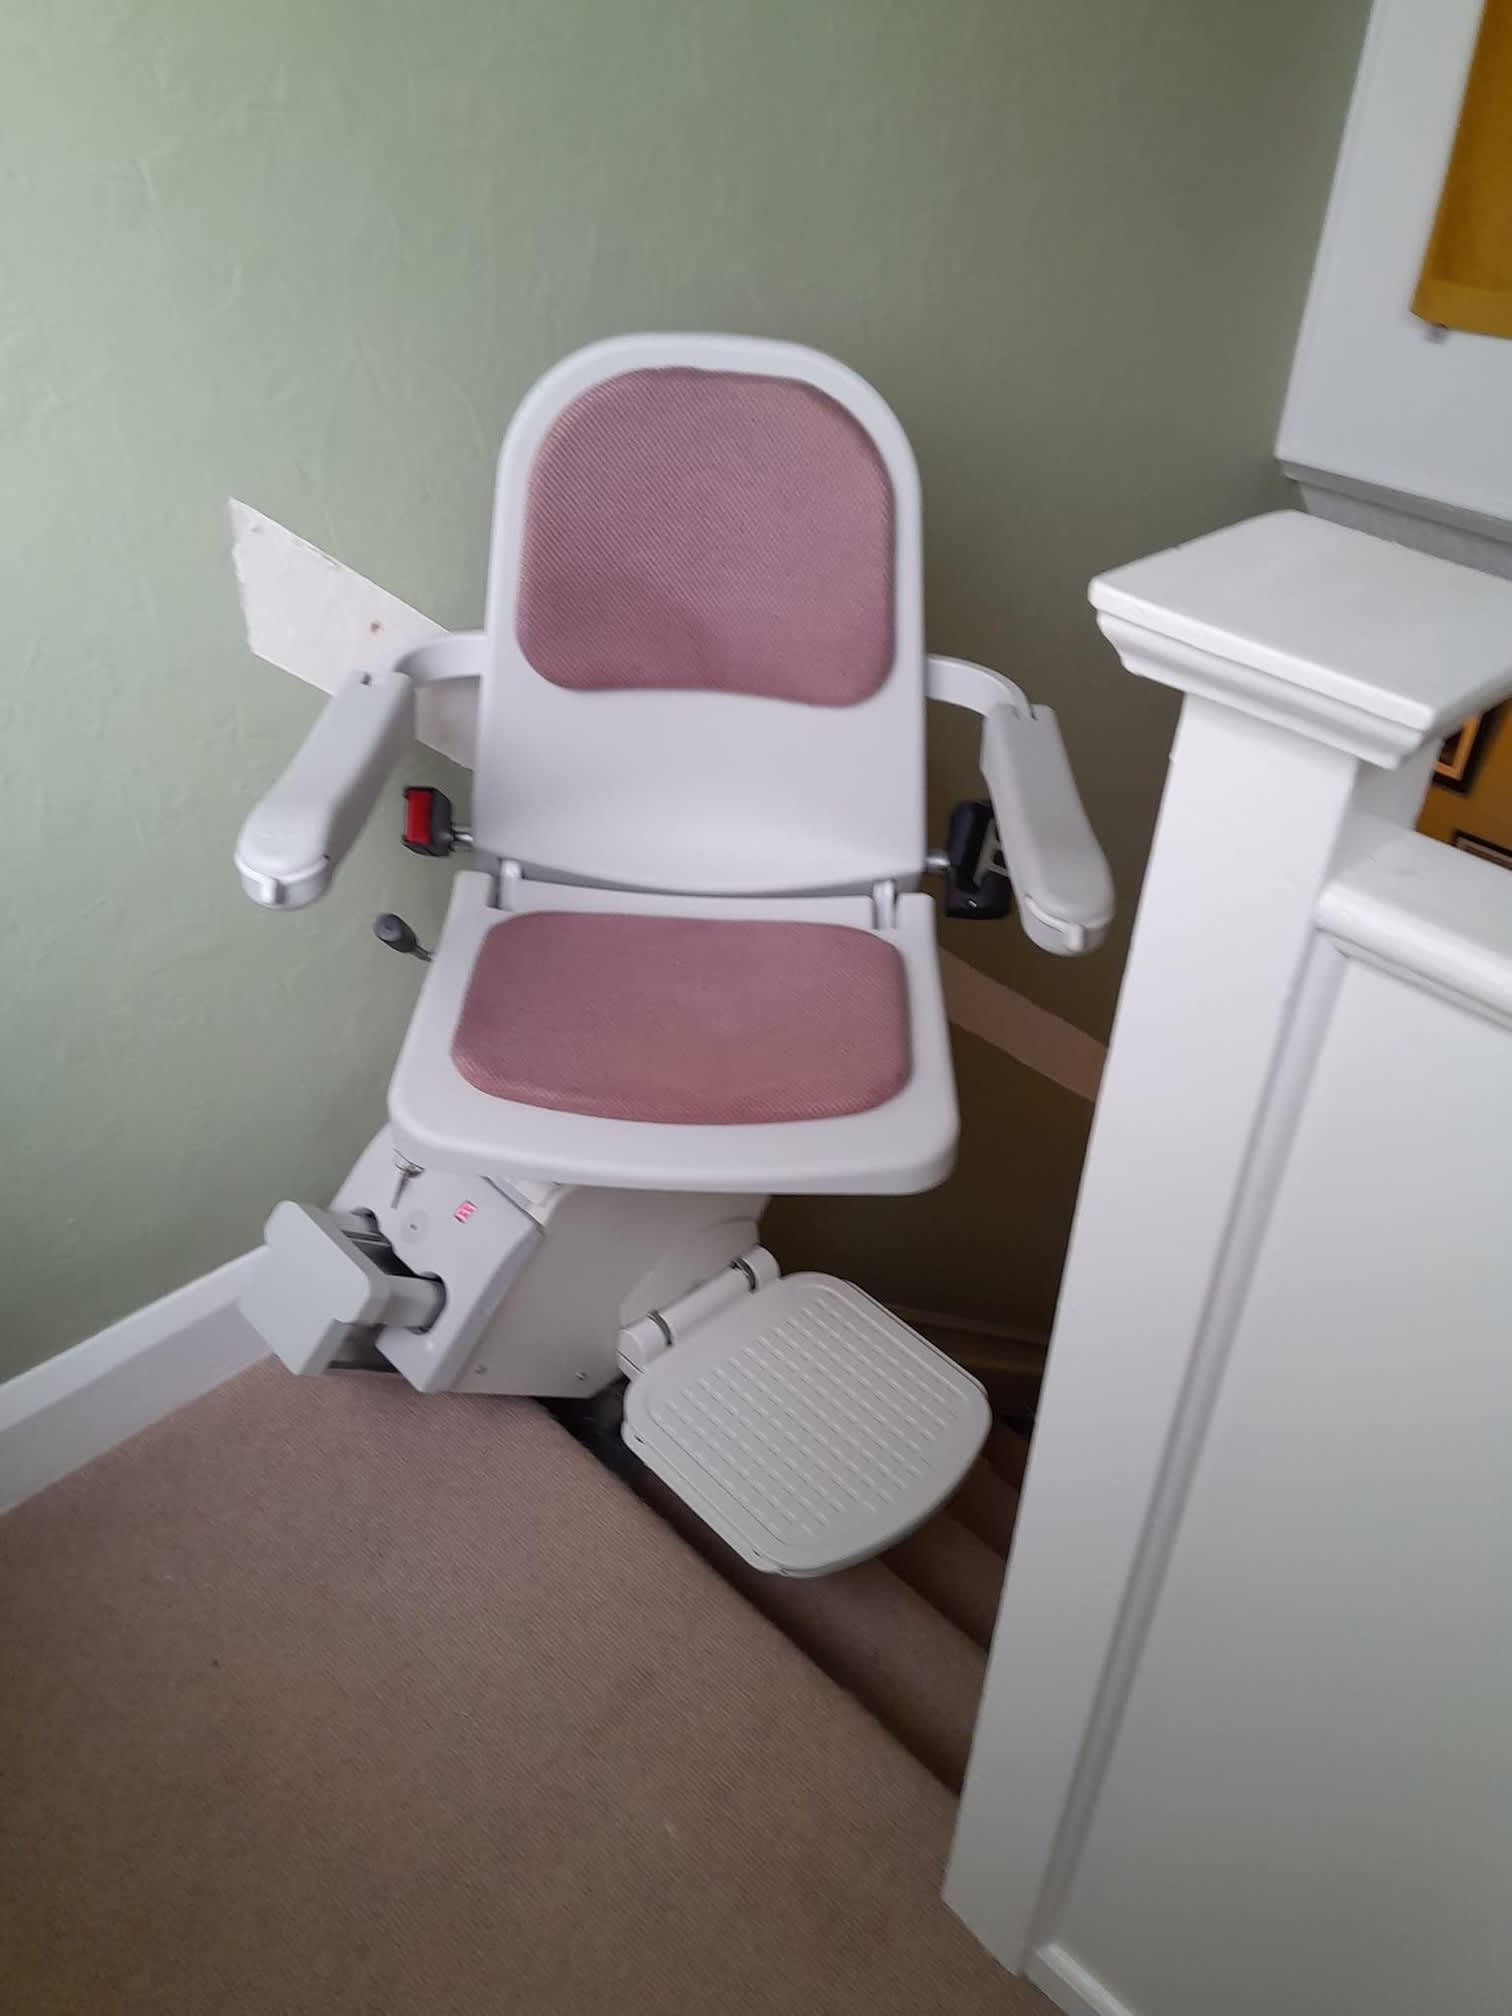 Images Think Stairlifts Ltd